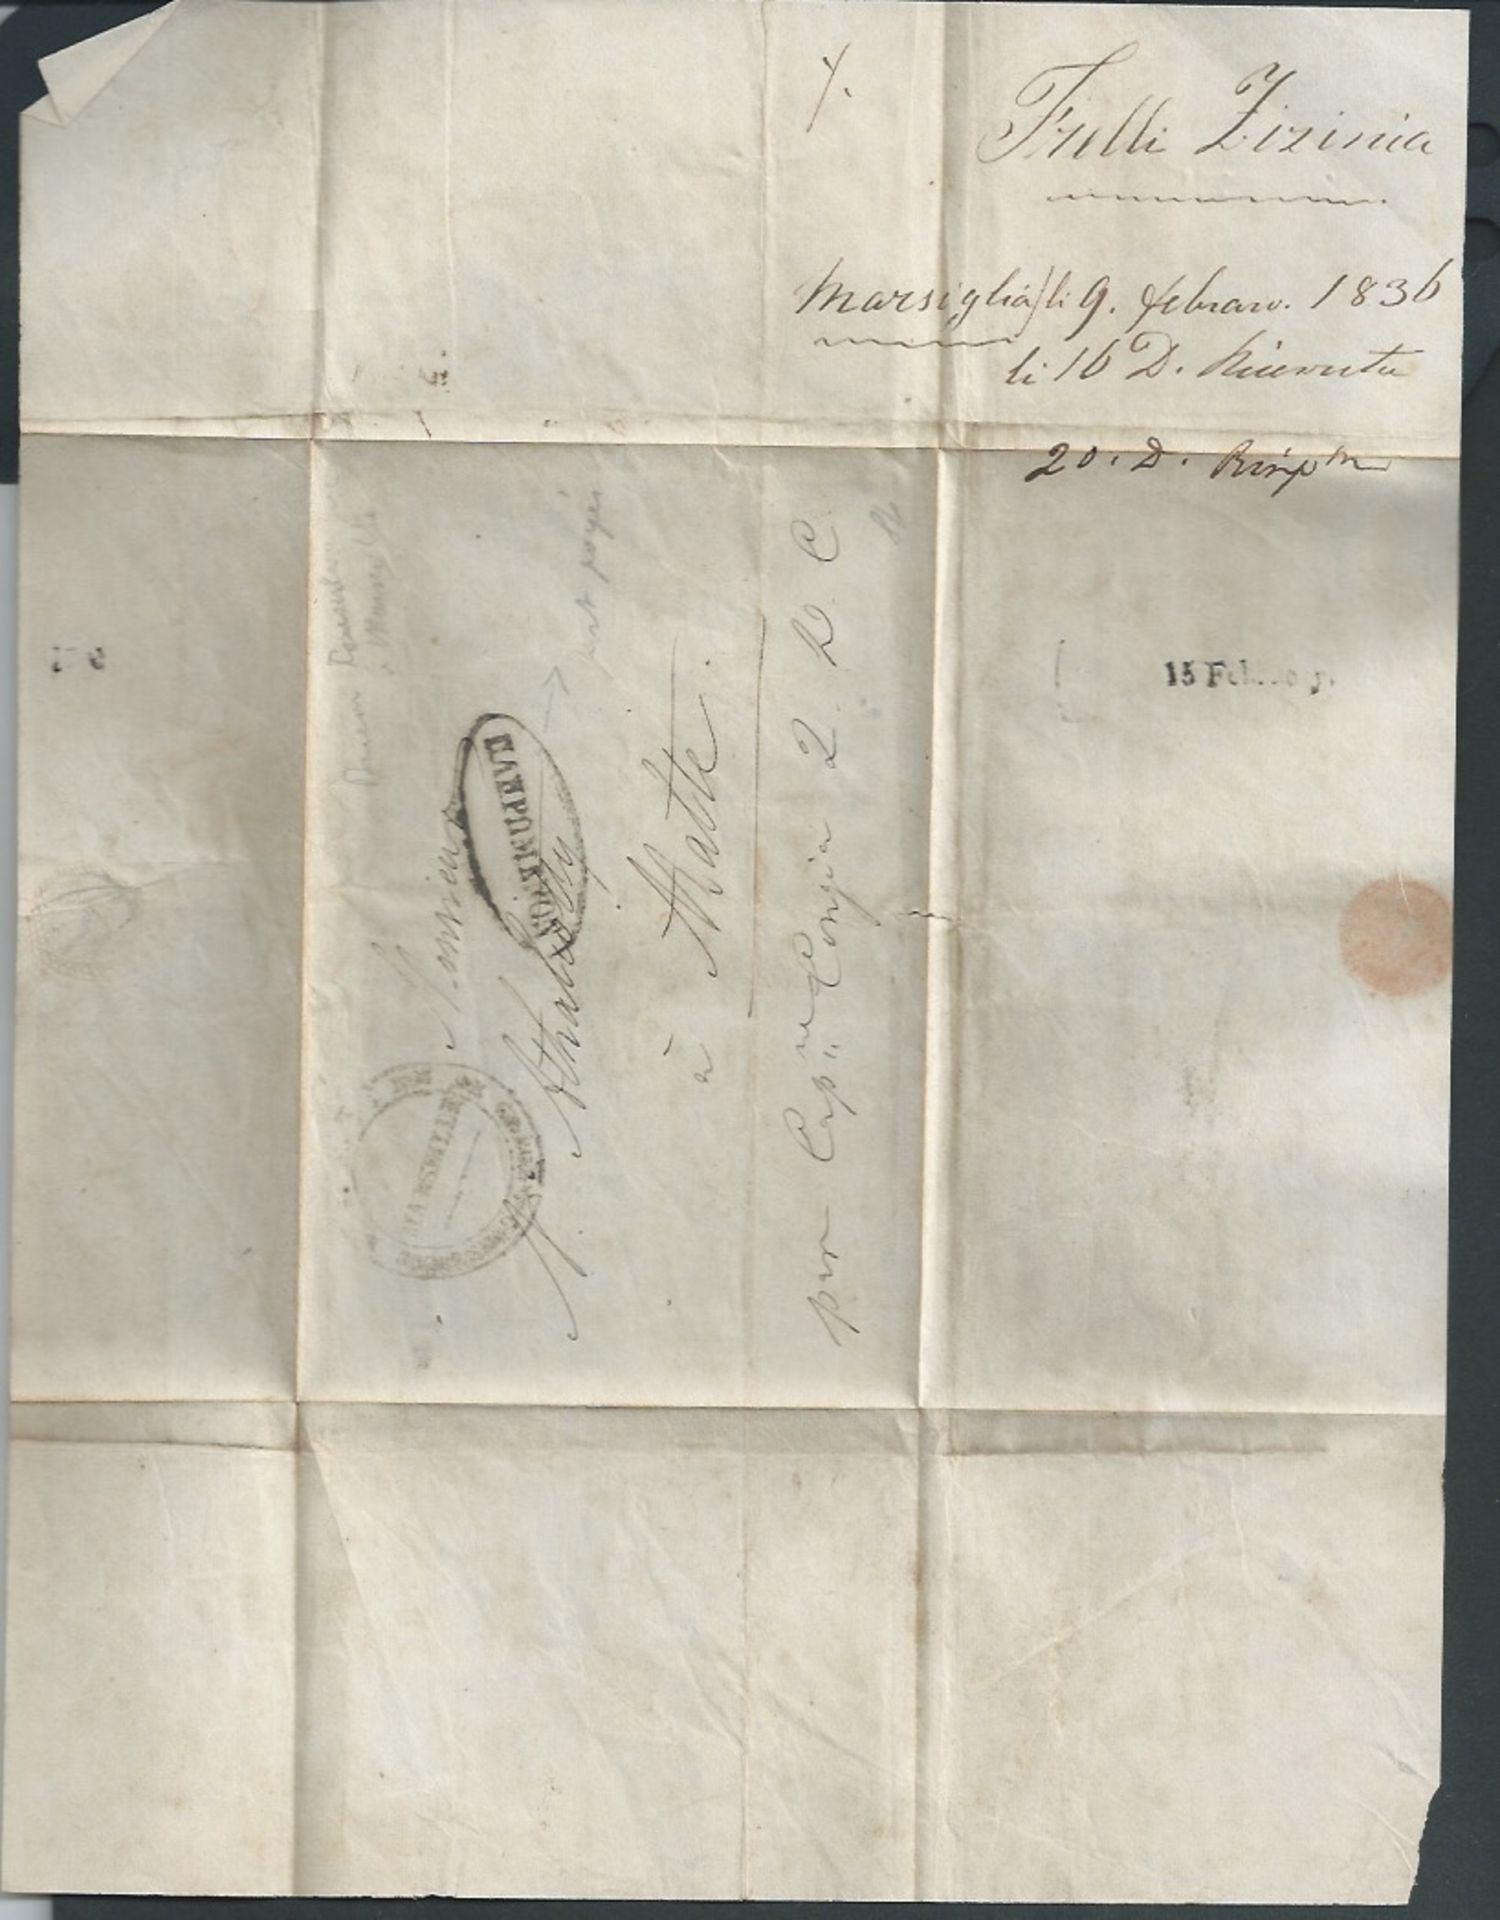 France / Malta 1836 Wrapper from Marseille 9th February 1835 to Malta with Malta mark on reverse. - Image 3 of 3